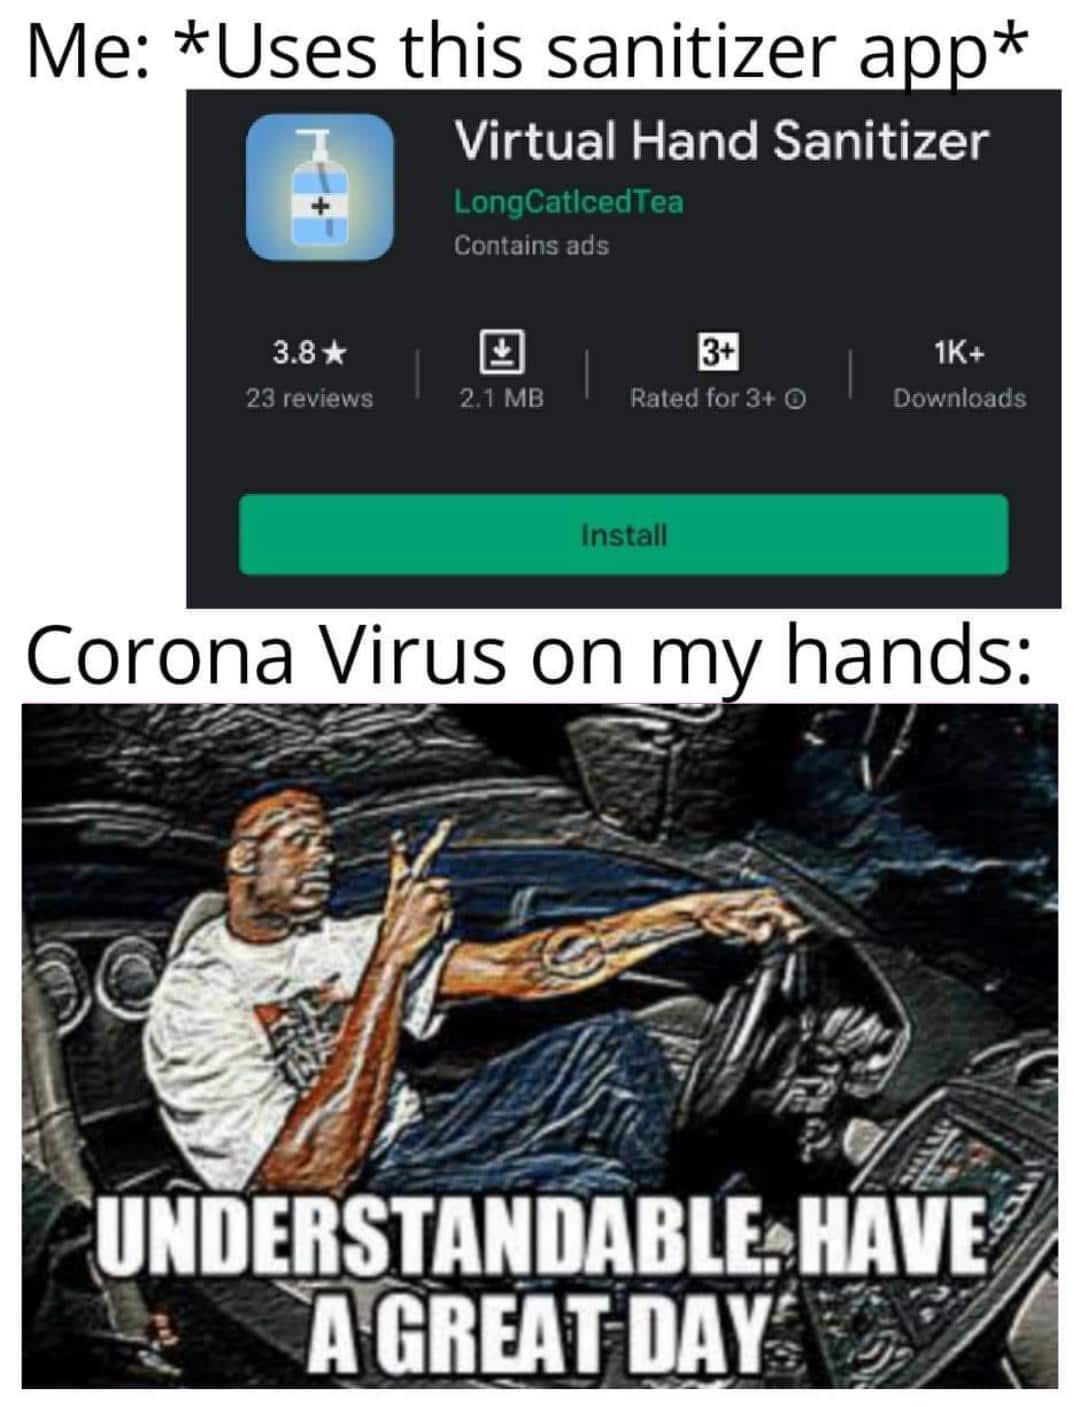 Funny, Guess other memes Funny, Guess text: Me: *Uses this sanitizer a Virtual Hand Sanitizer LongCatlcedTea Contains ads 3.8 23 reviews 2.1 MB Rated for 3+ O Install Downloads Corona Virus on m hands: UNDERSTANDABLEHAVE 